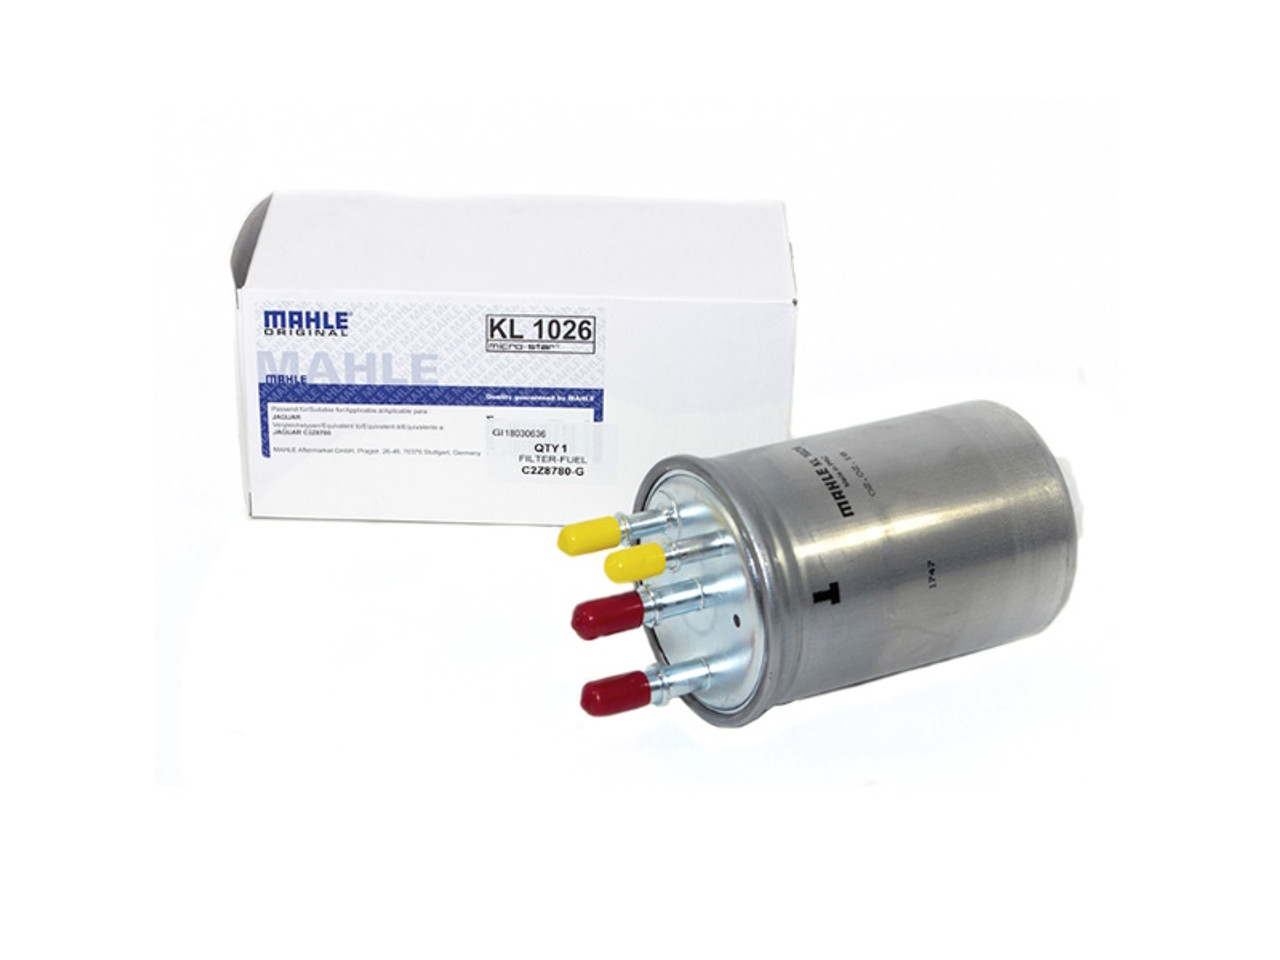 Mahle XJ and XF 3.0 V6 Diesel Fuel Filter - C2Z8780